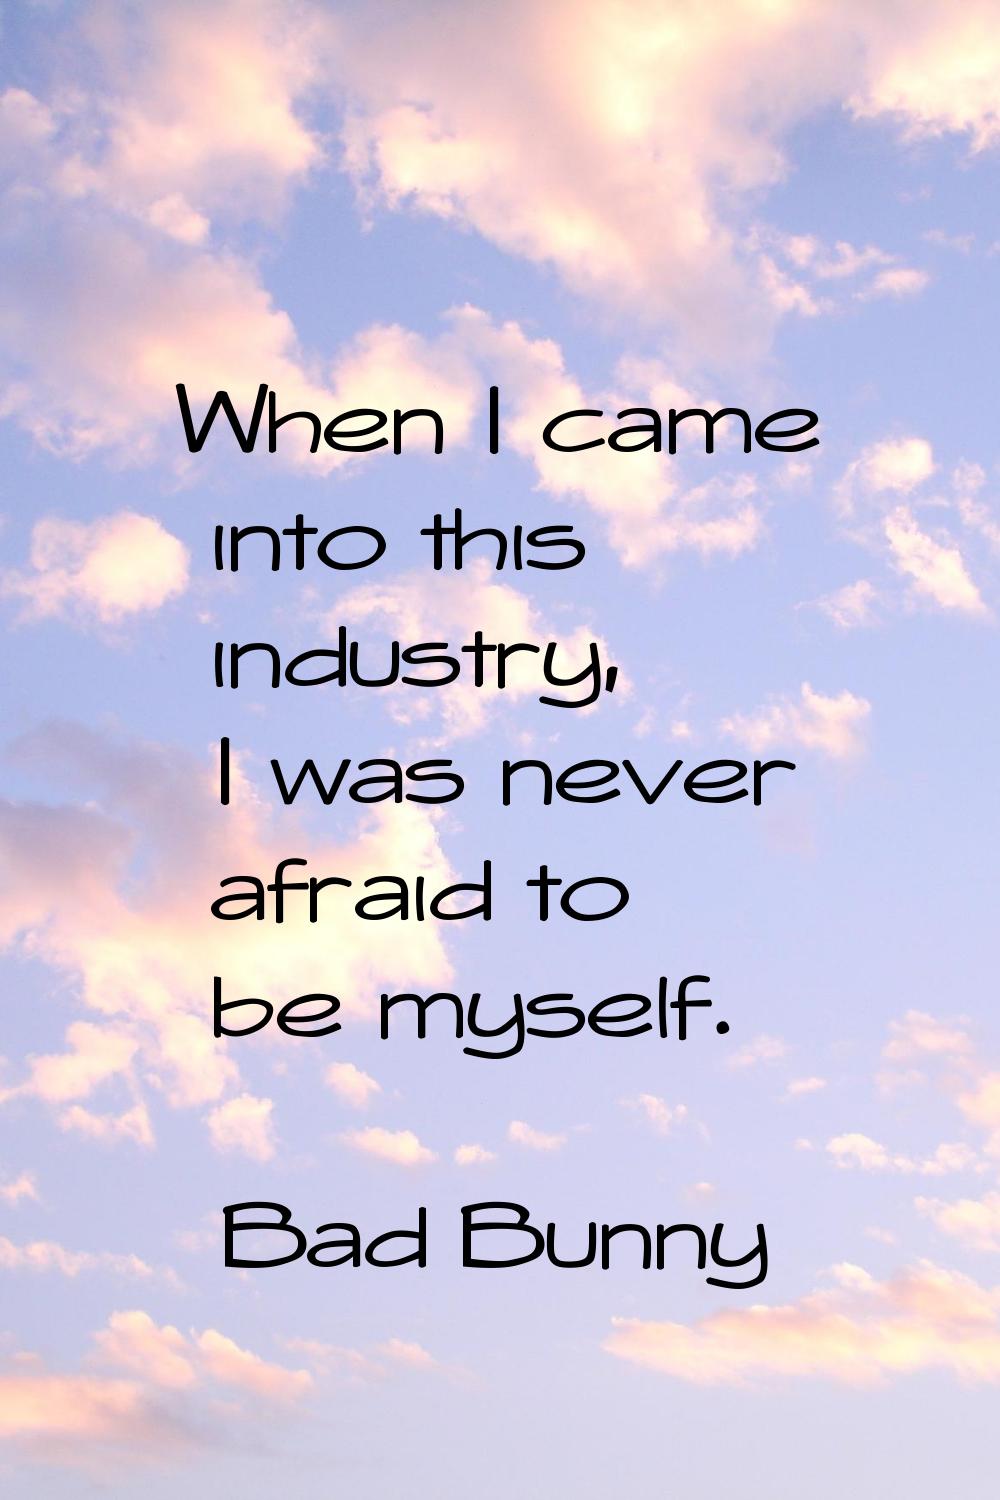 When I came into this industry, I was never afraid to be myself.